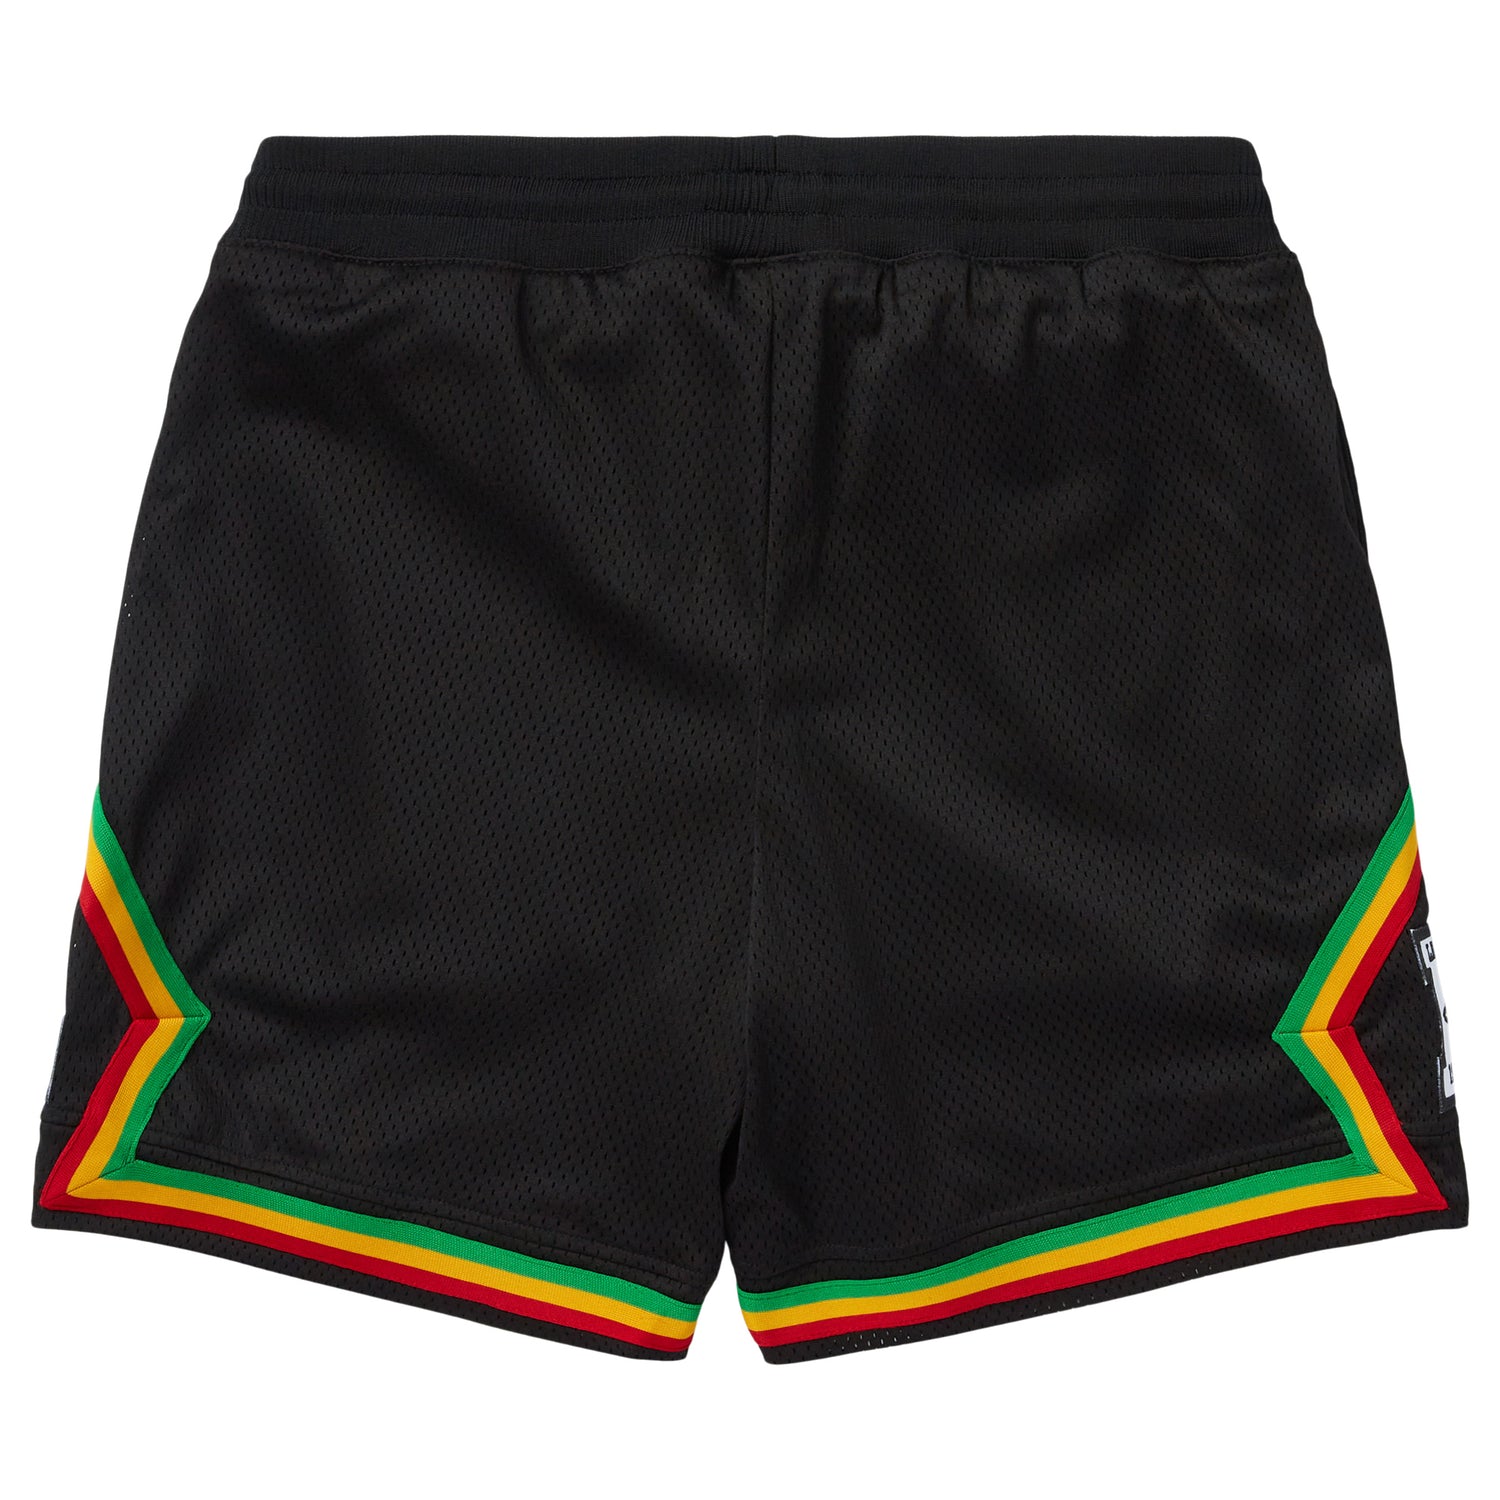 LIFTED PEOPLE MESH SHORTS - BLACK